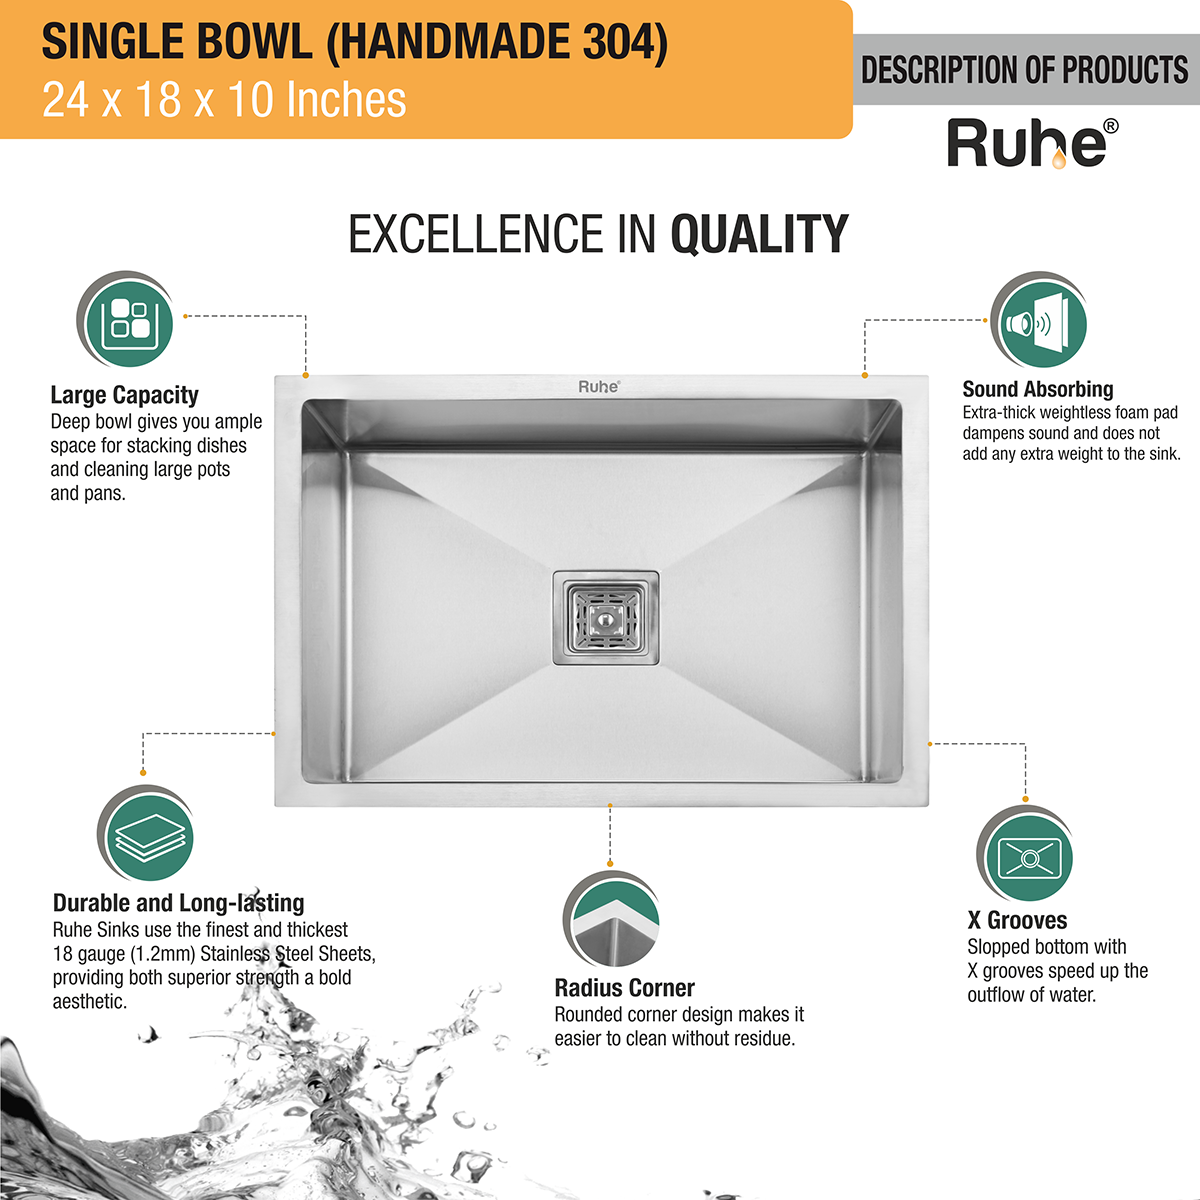 Handmade Single Bowl 304-Grade Kitchen Sink (24 x 18 x 10 Inches) description and quality of sink